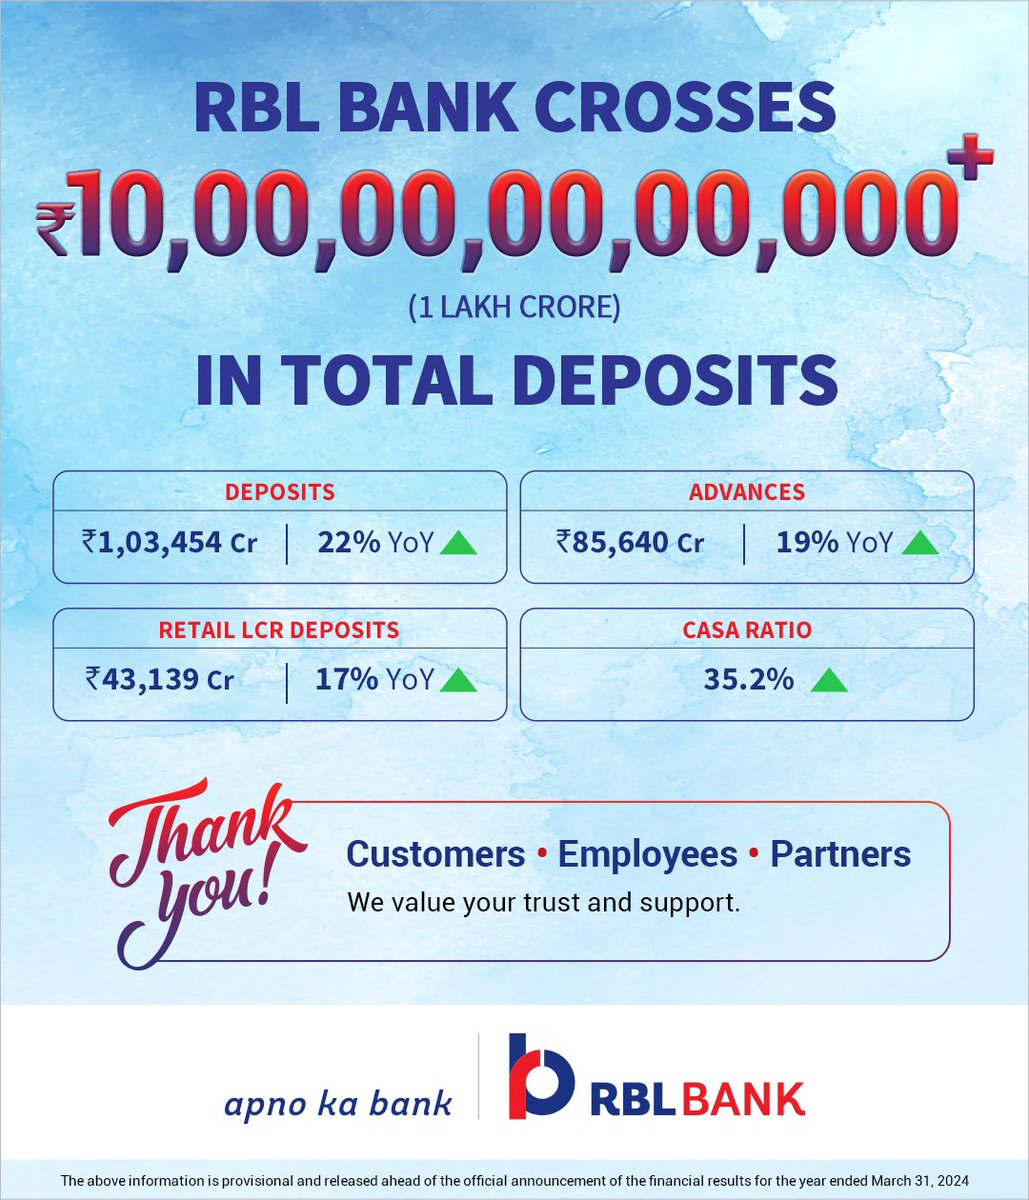 RBL Bank Crosses 1 Lakh Crores in Total Deposits. Here’s a snapshot of the provisional numbers for the year ended March 31, 2024. #MilestoneAlert #RBLBank #ApnoKaBank